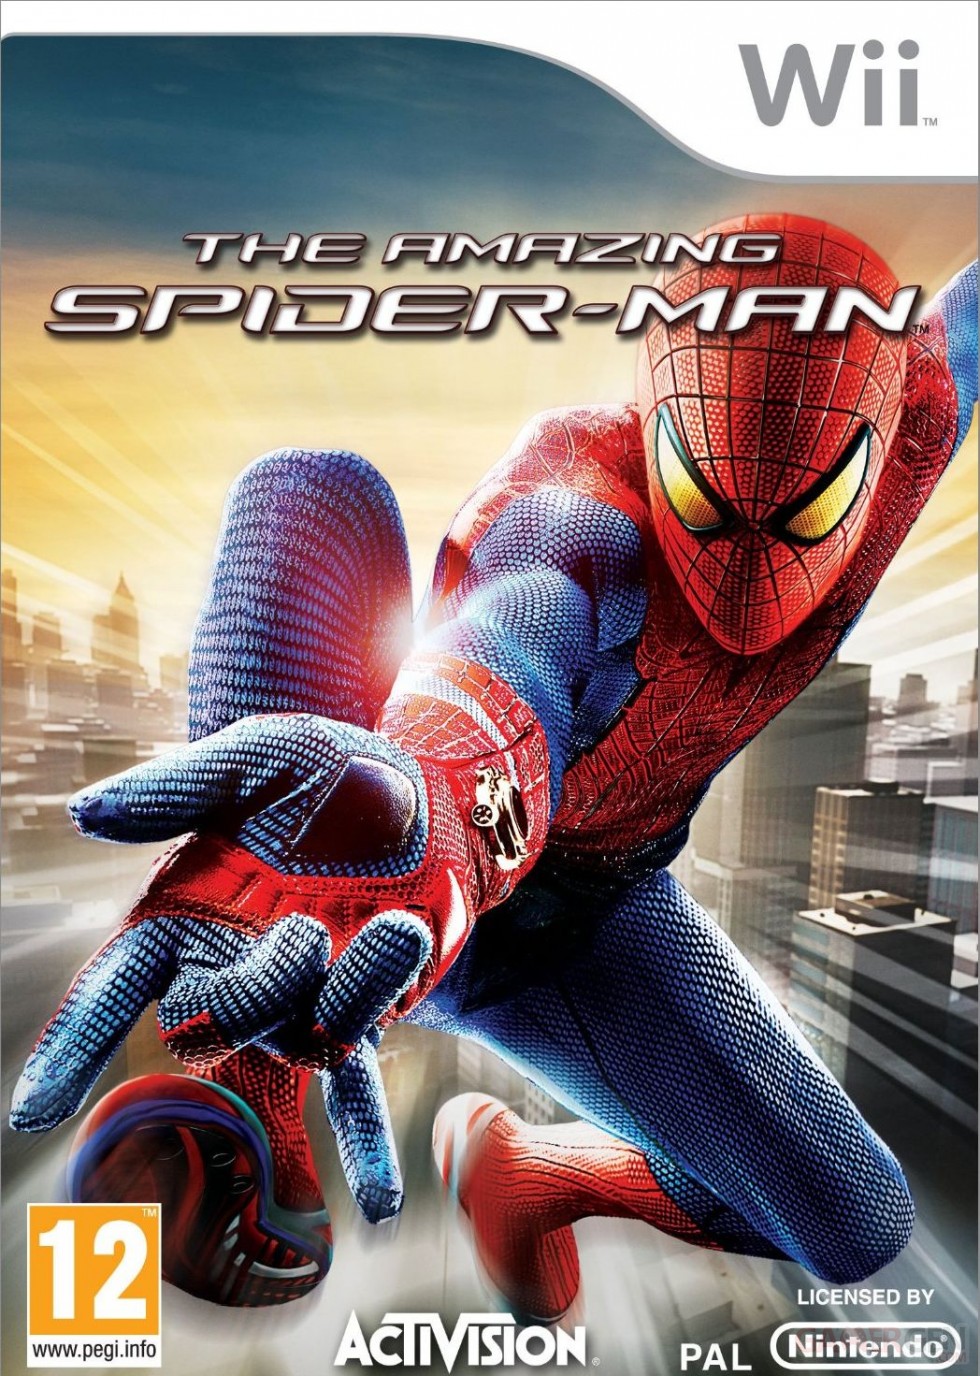 the-amazing-spider-man-jaquette-cover-boxart-nintendo-wii